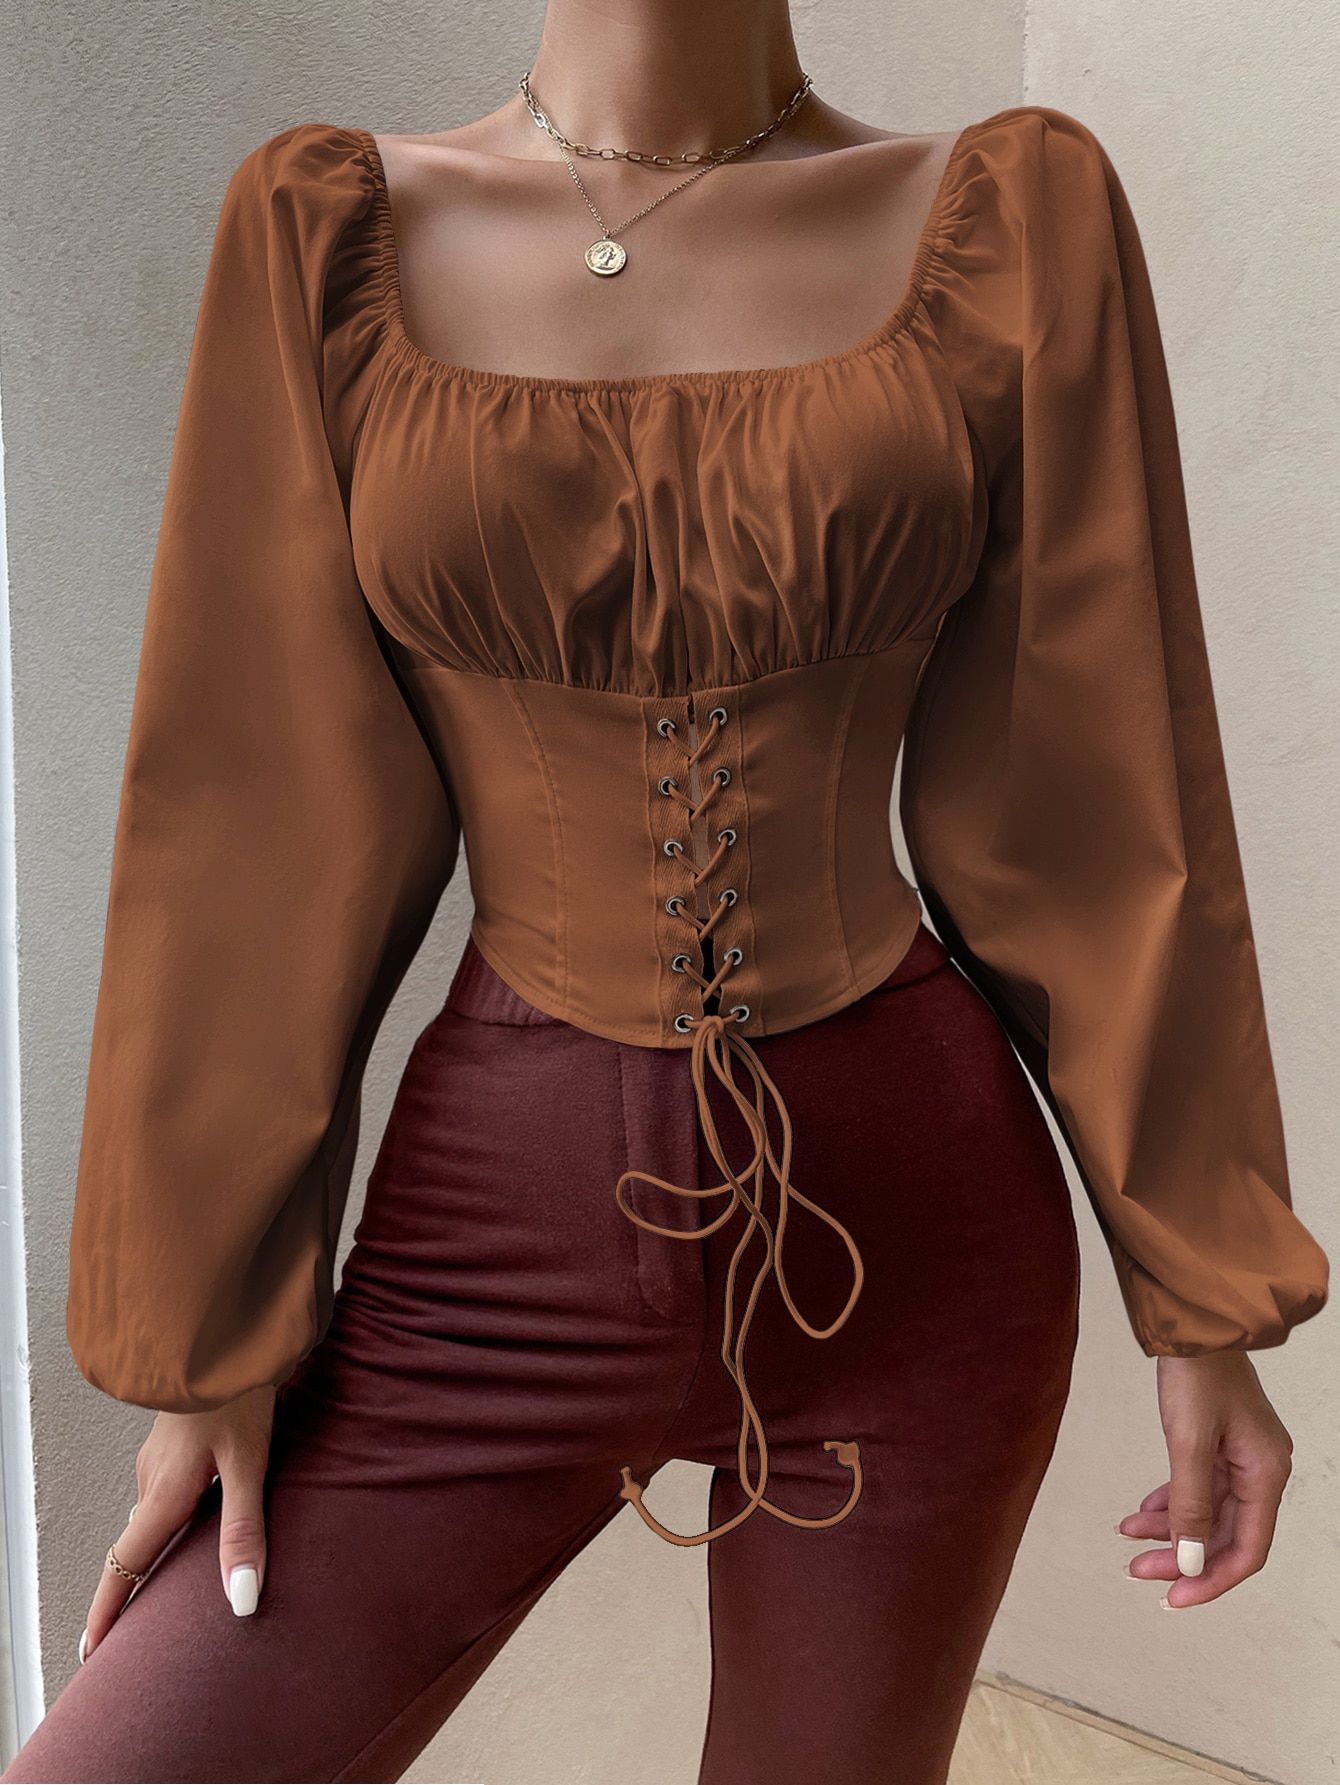 Earthy Elegance: Brown Blouse Designs That Add Warmth to Your Wardrobe